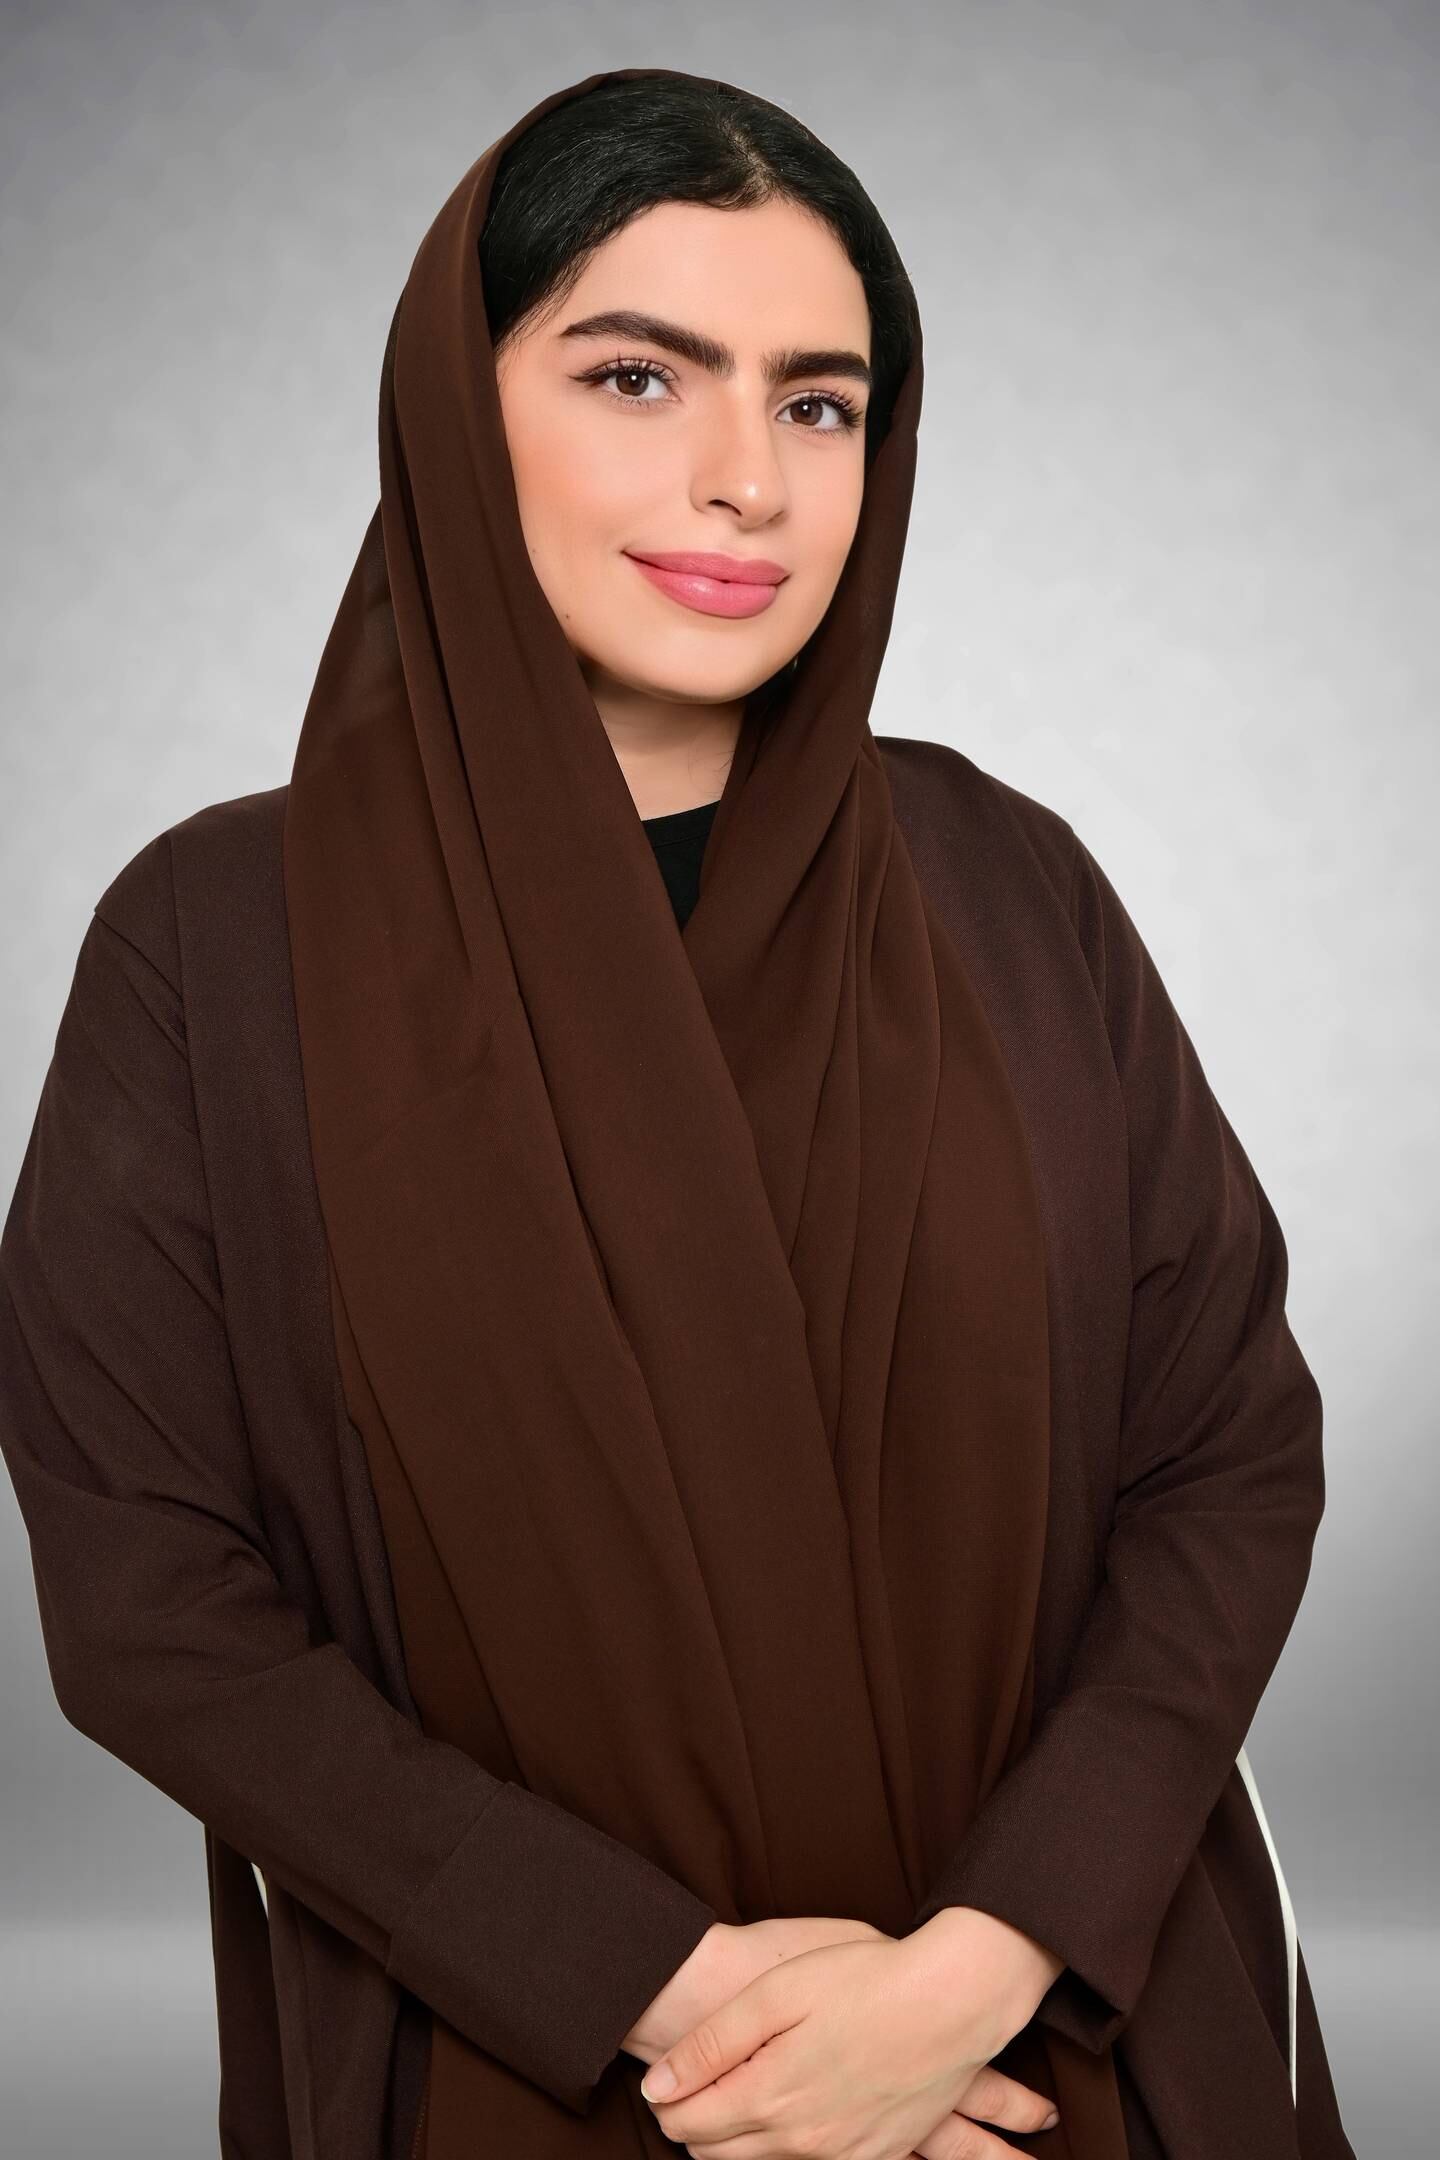 Qadreya Al Awadi, a financial services professional and owner of baby food brand Bumblebee, started investing in equities at the age of 16. Photo: Qadreya Al Awadi